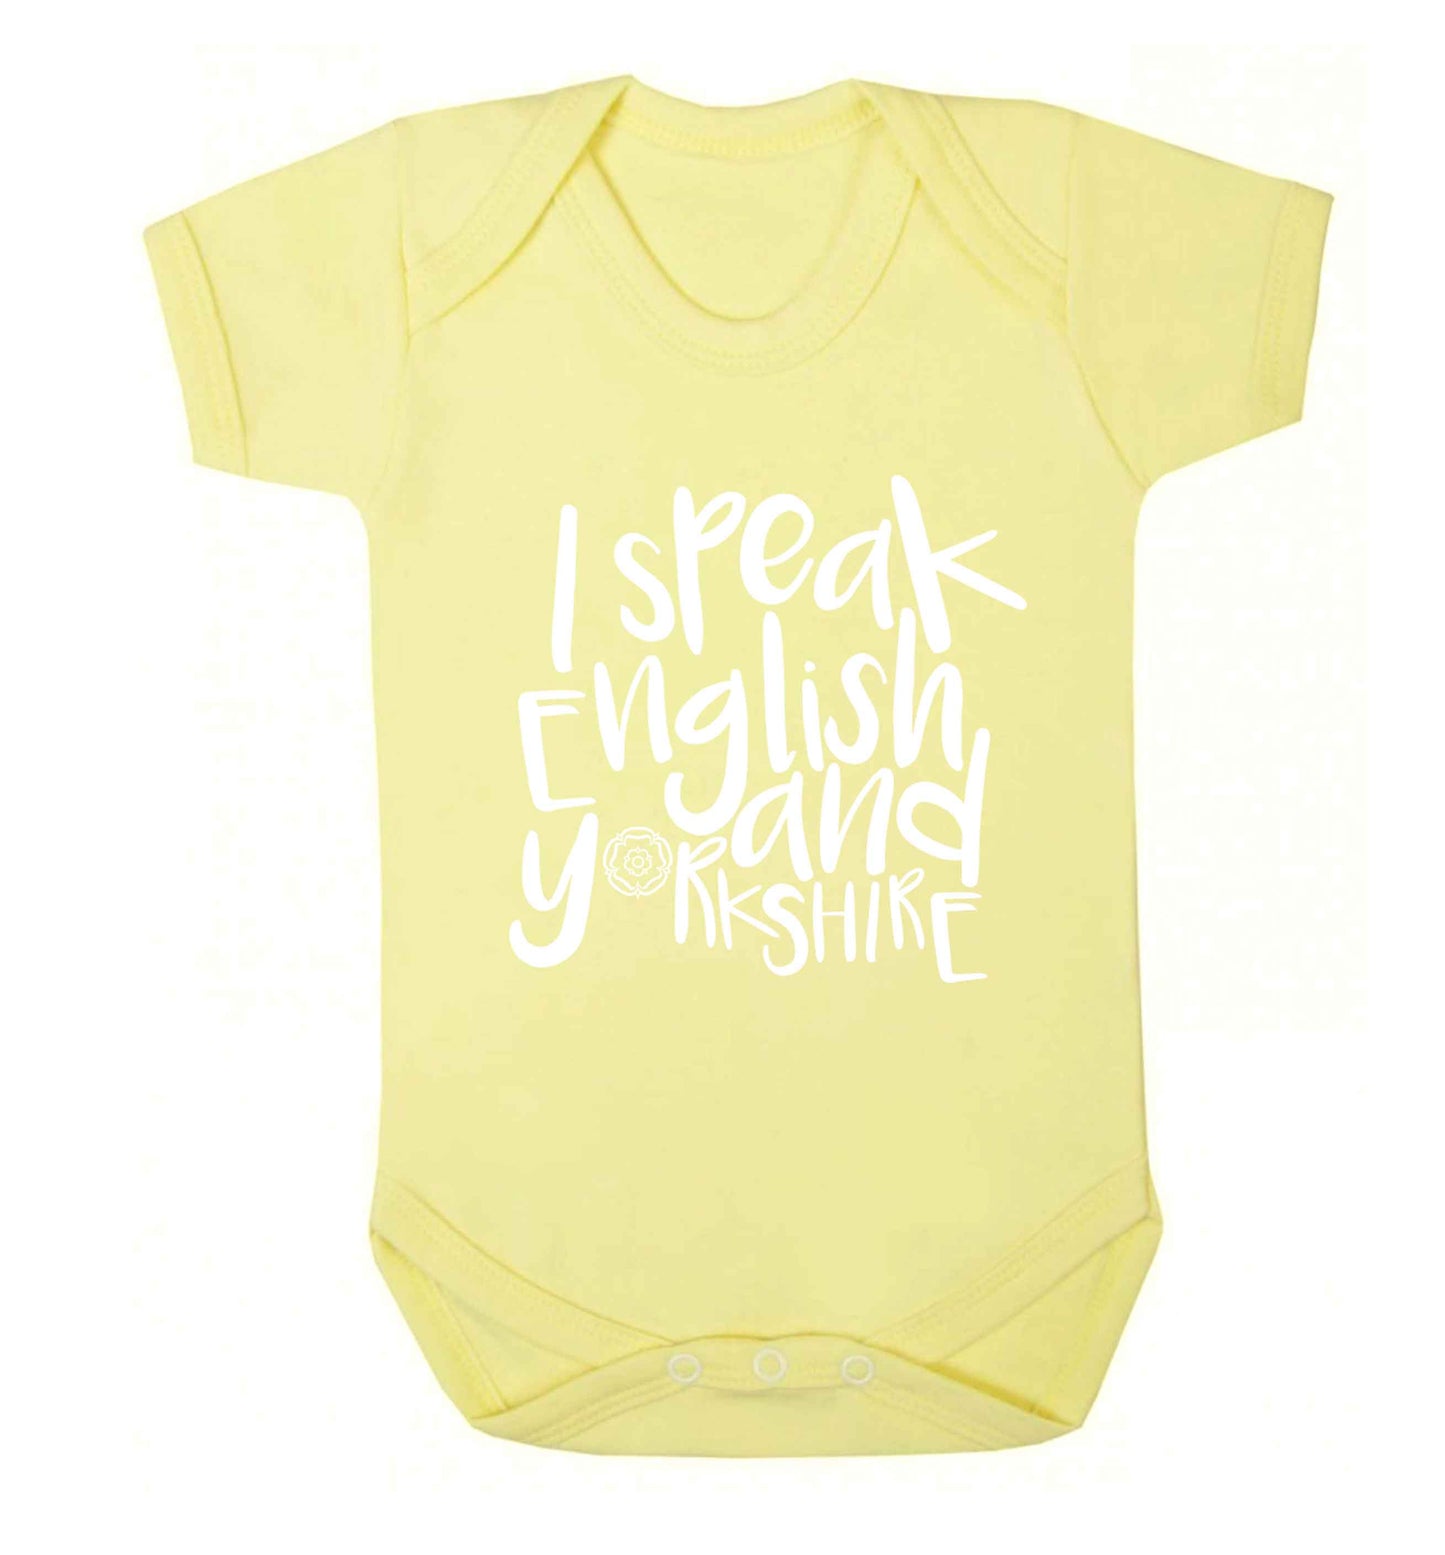 I speak English and Yorkshire Baby Vest pale yellow 18-24 months